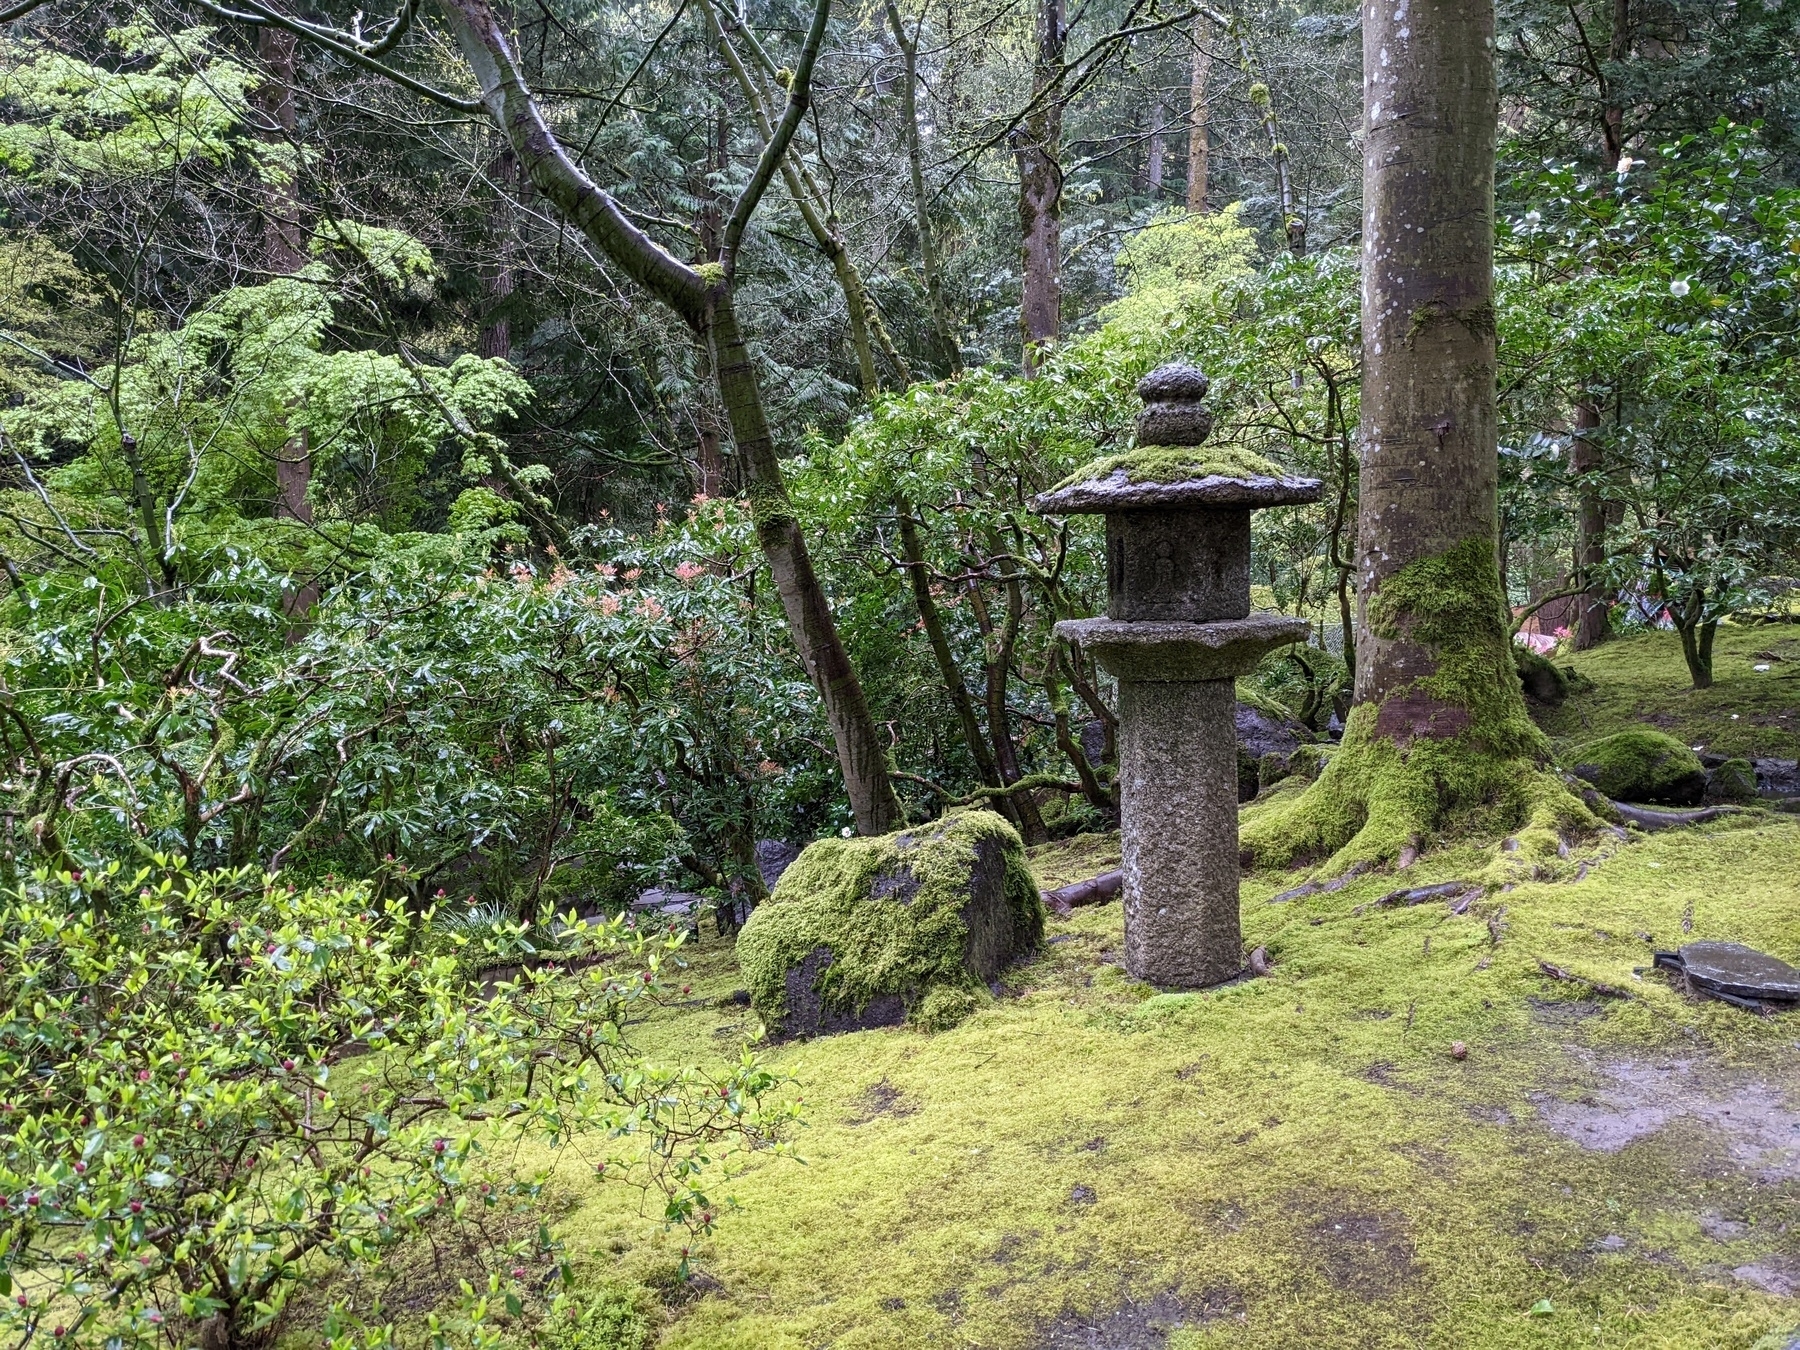 a moss-covered Japanese stone lantern in a garden, set in a bed of moss under a tree